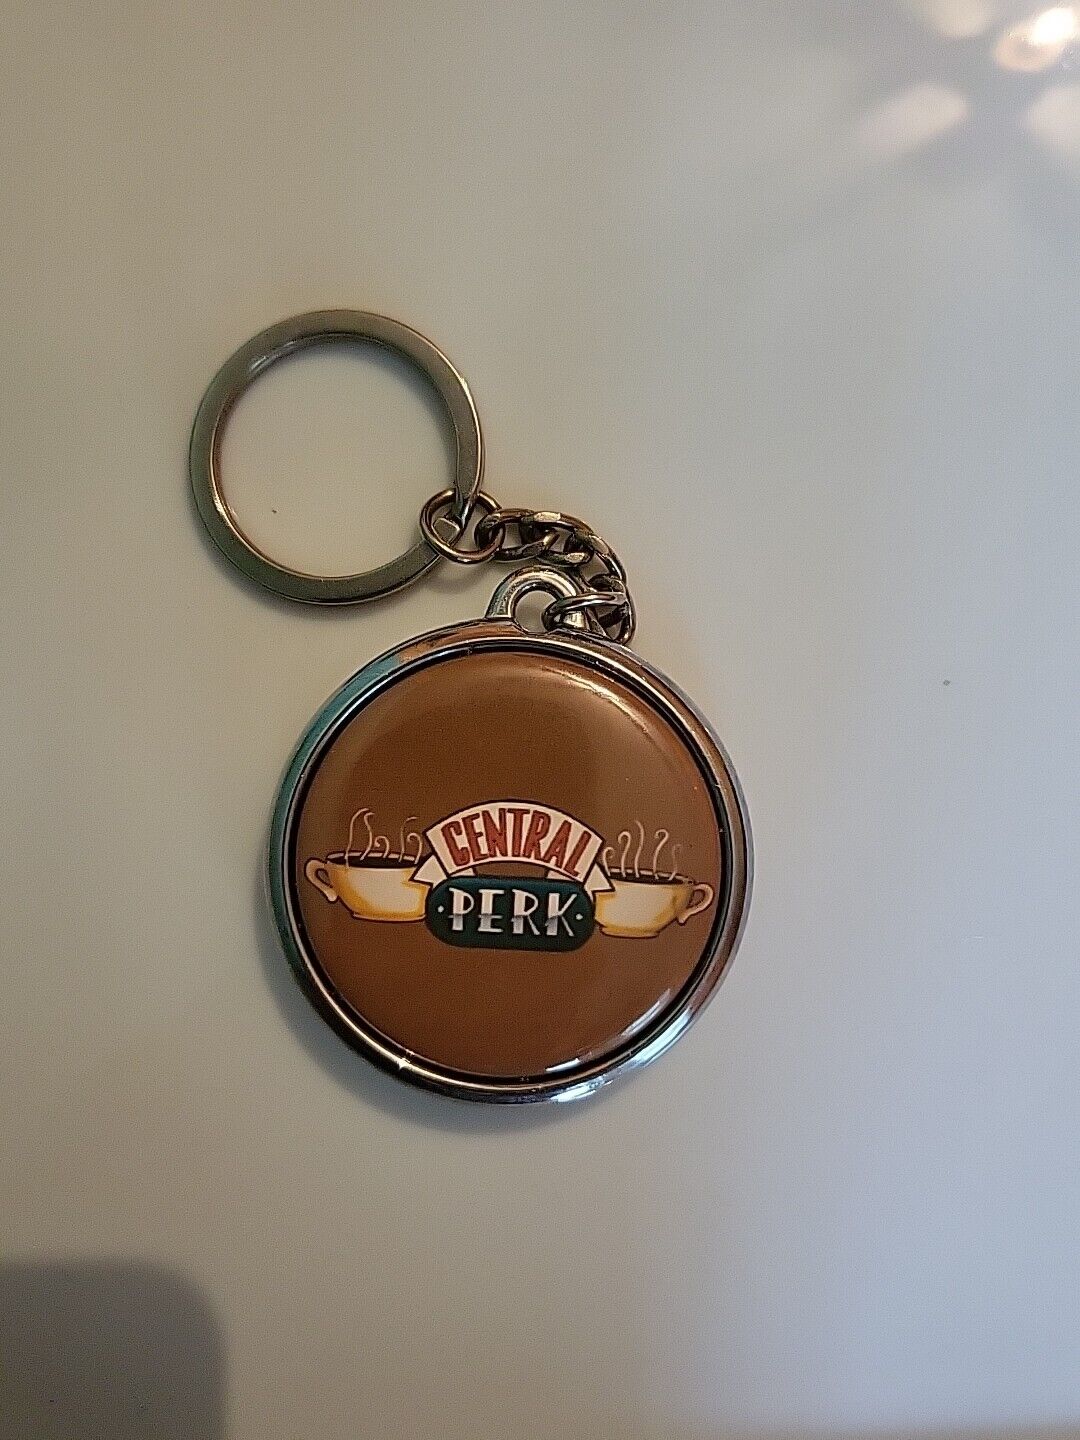 Central Perk Keychain Double Sided